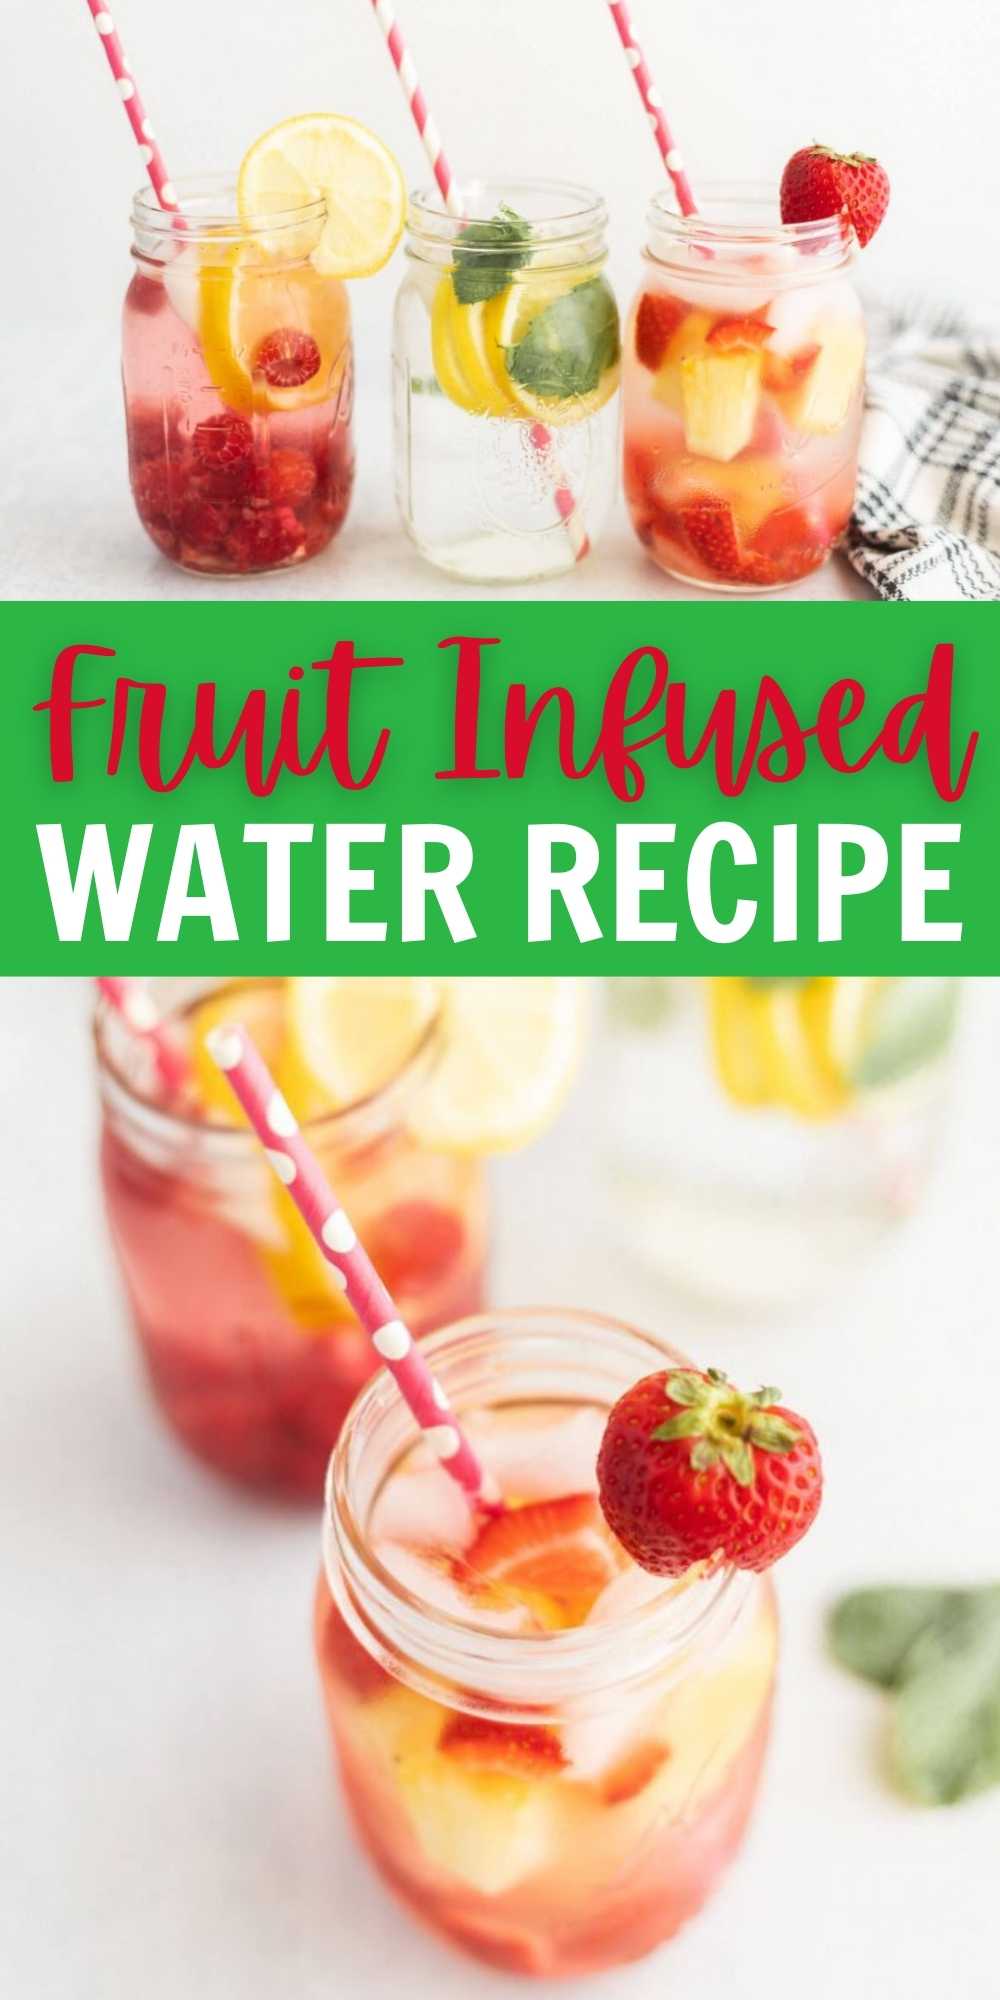 Easy and Healthy Fruit Infused Water Recipes